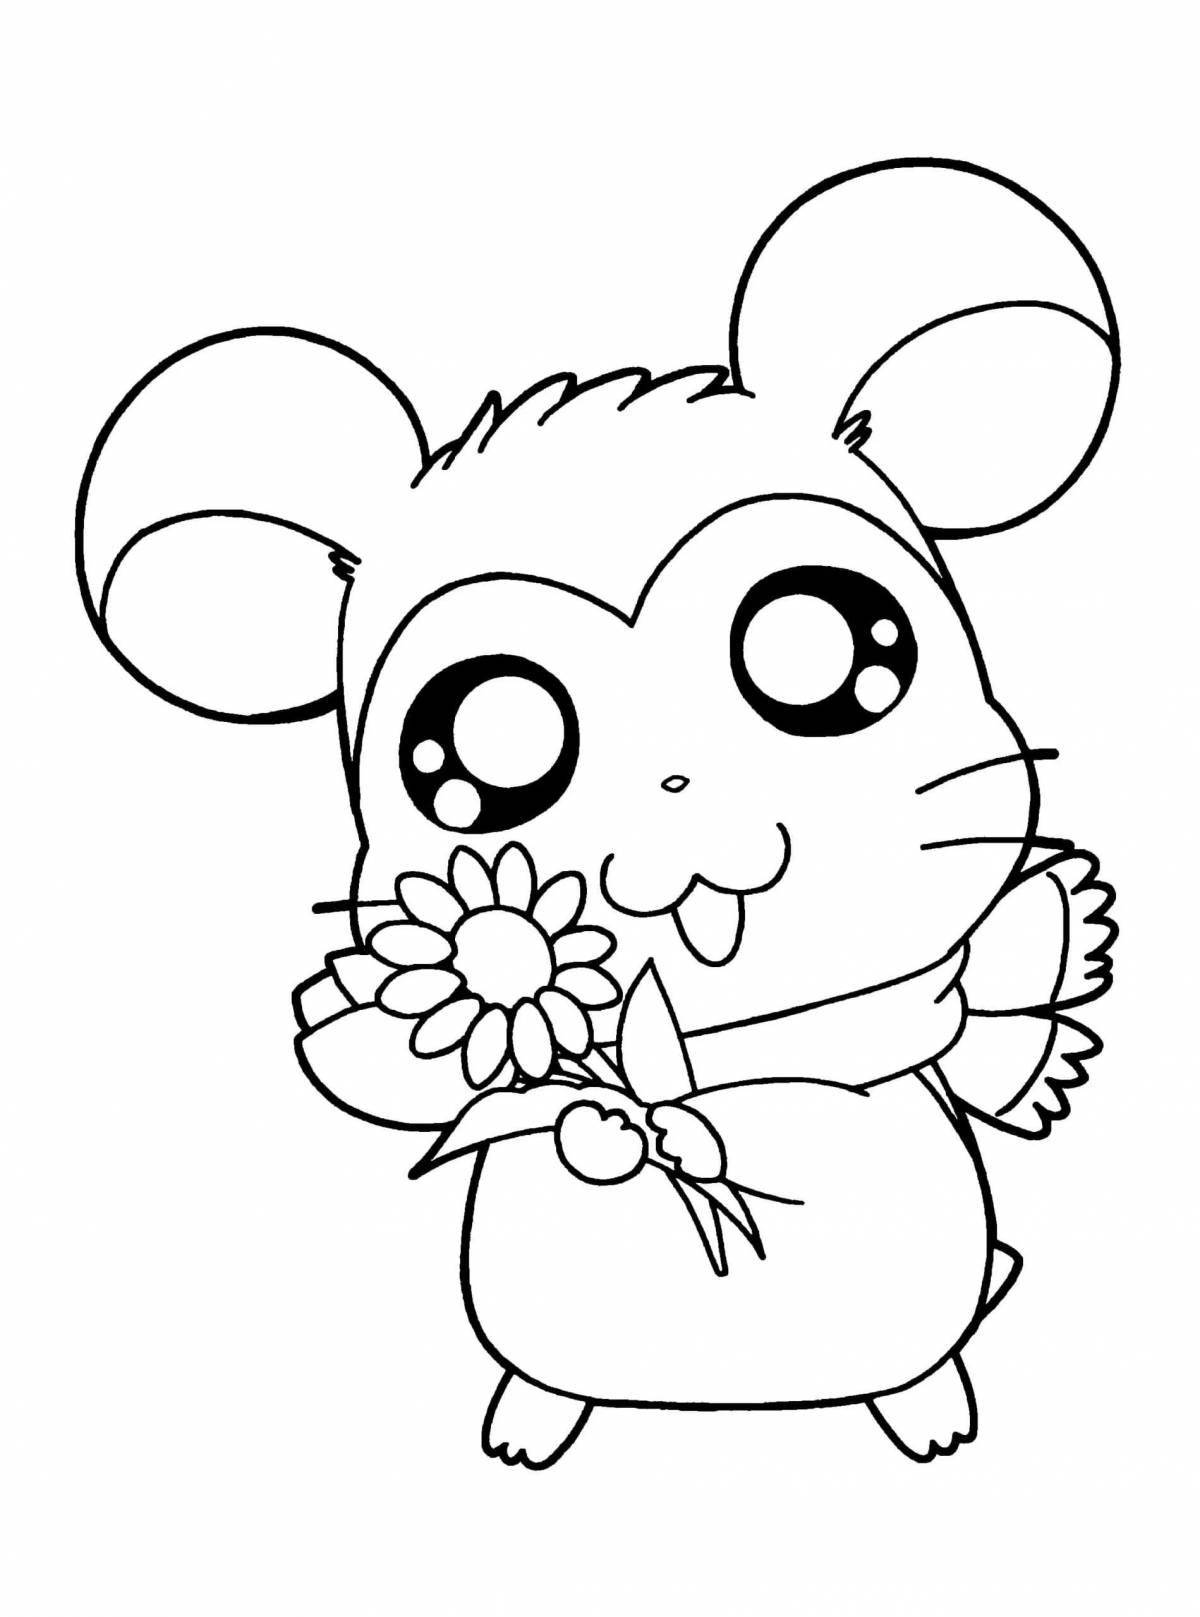 Amazing coloring pages for girls with animals